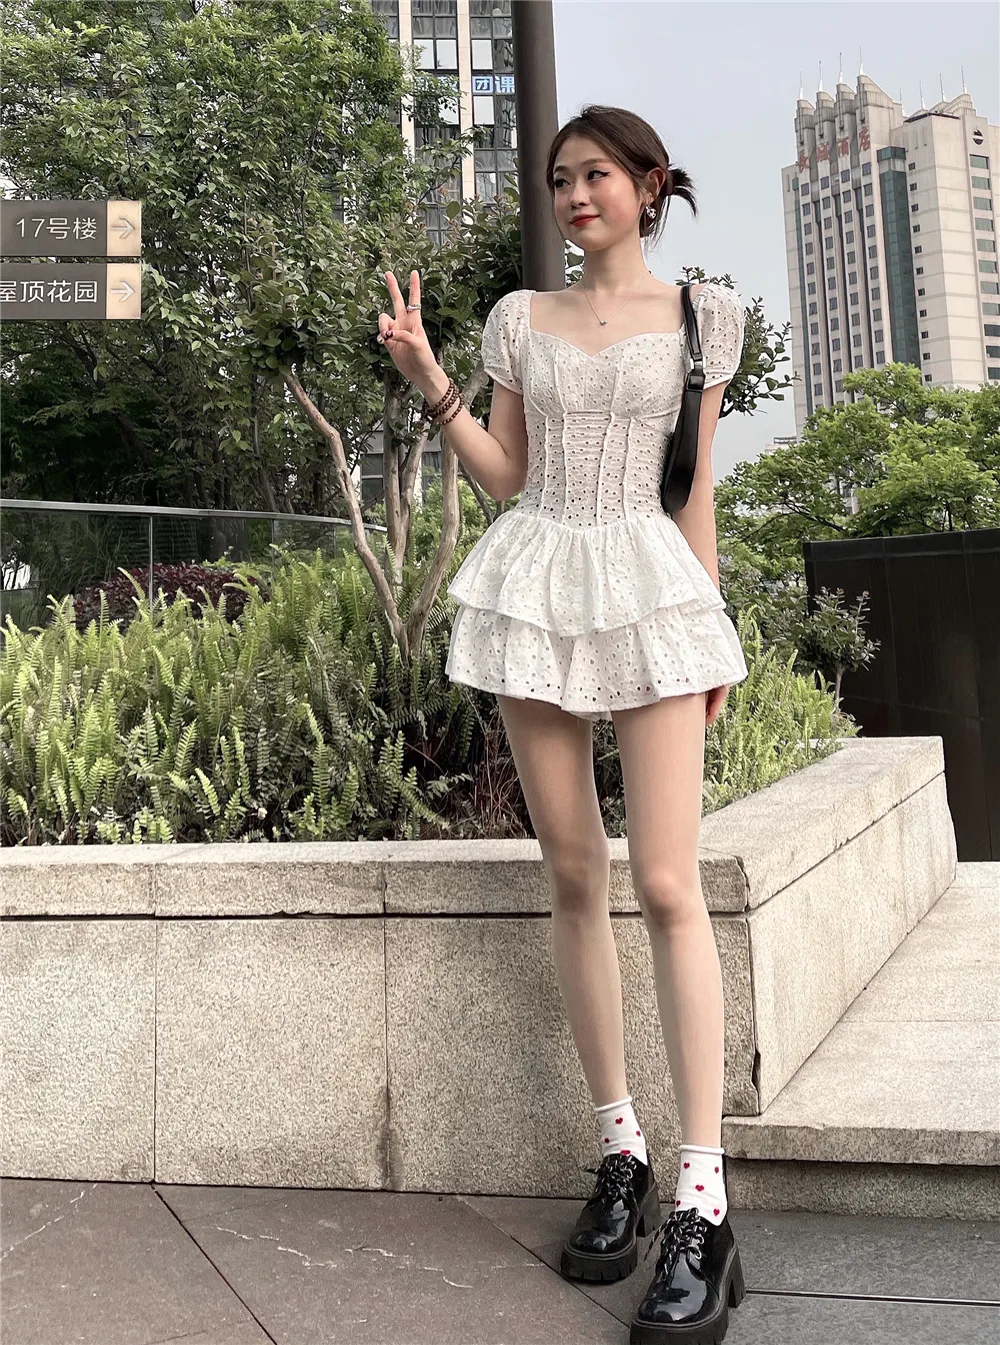 Chic Black Vintage Peplum Corset Top Dress With Square Cut Collar, Ruffles,  And Puff Sleeves For Womens Casual And Party Wear From Melinayaoyao, $33.65